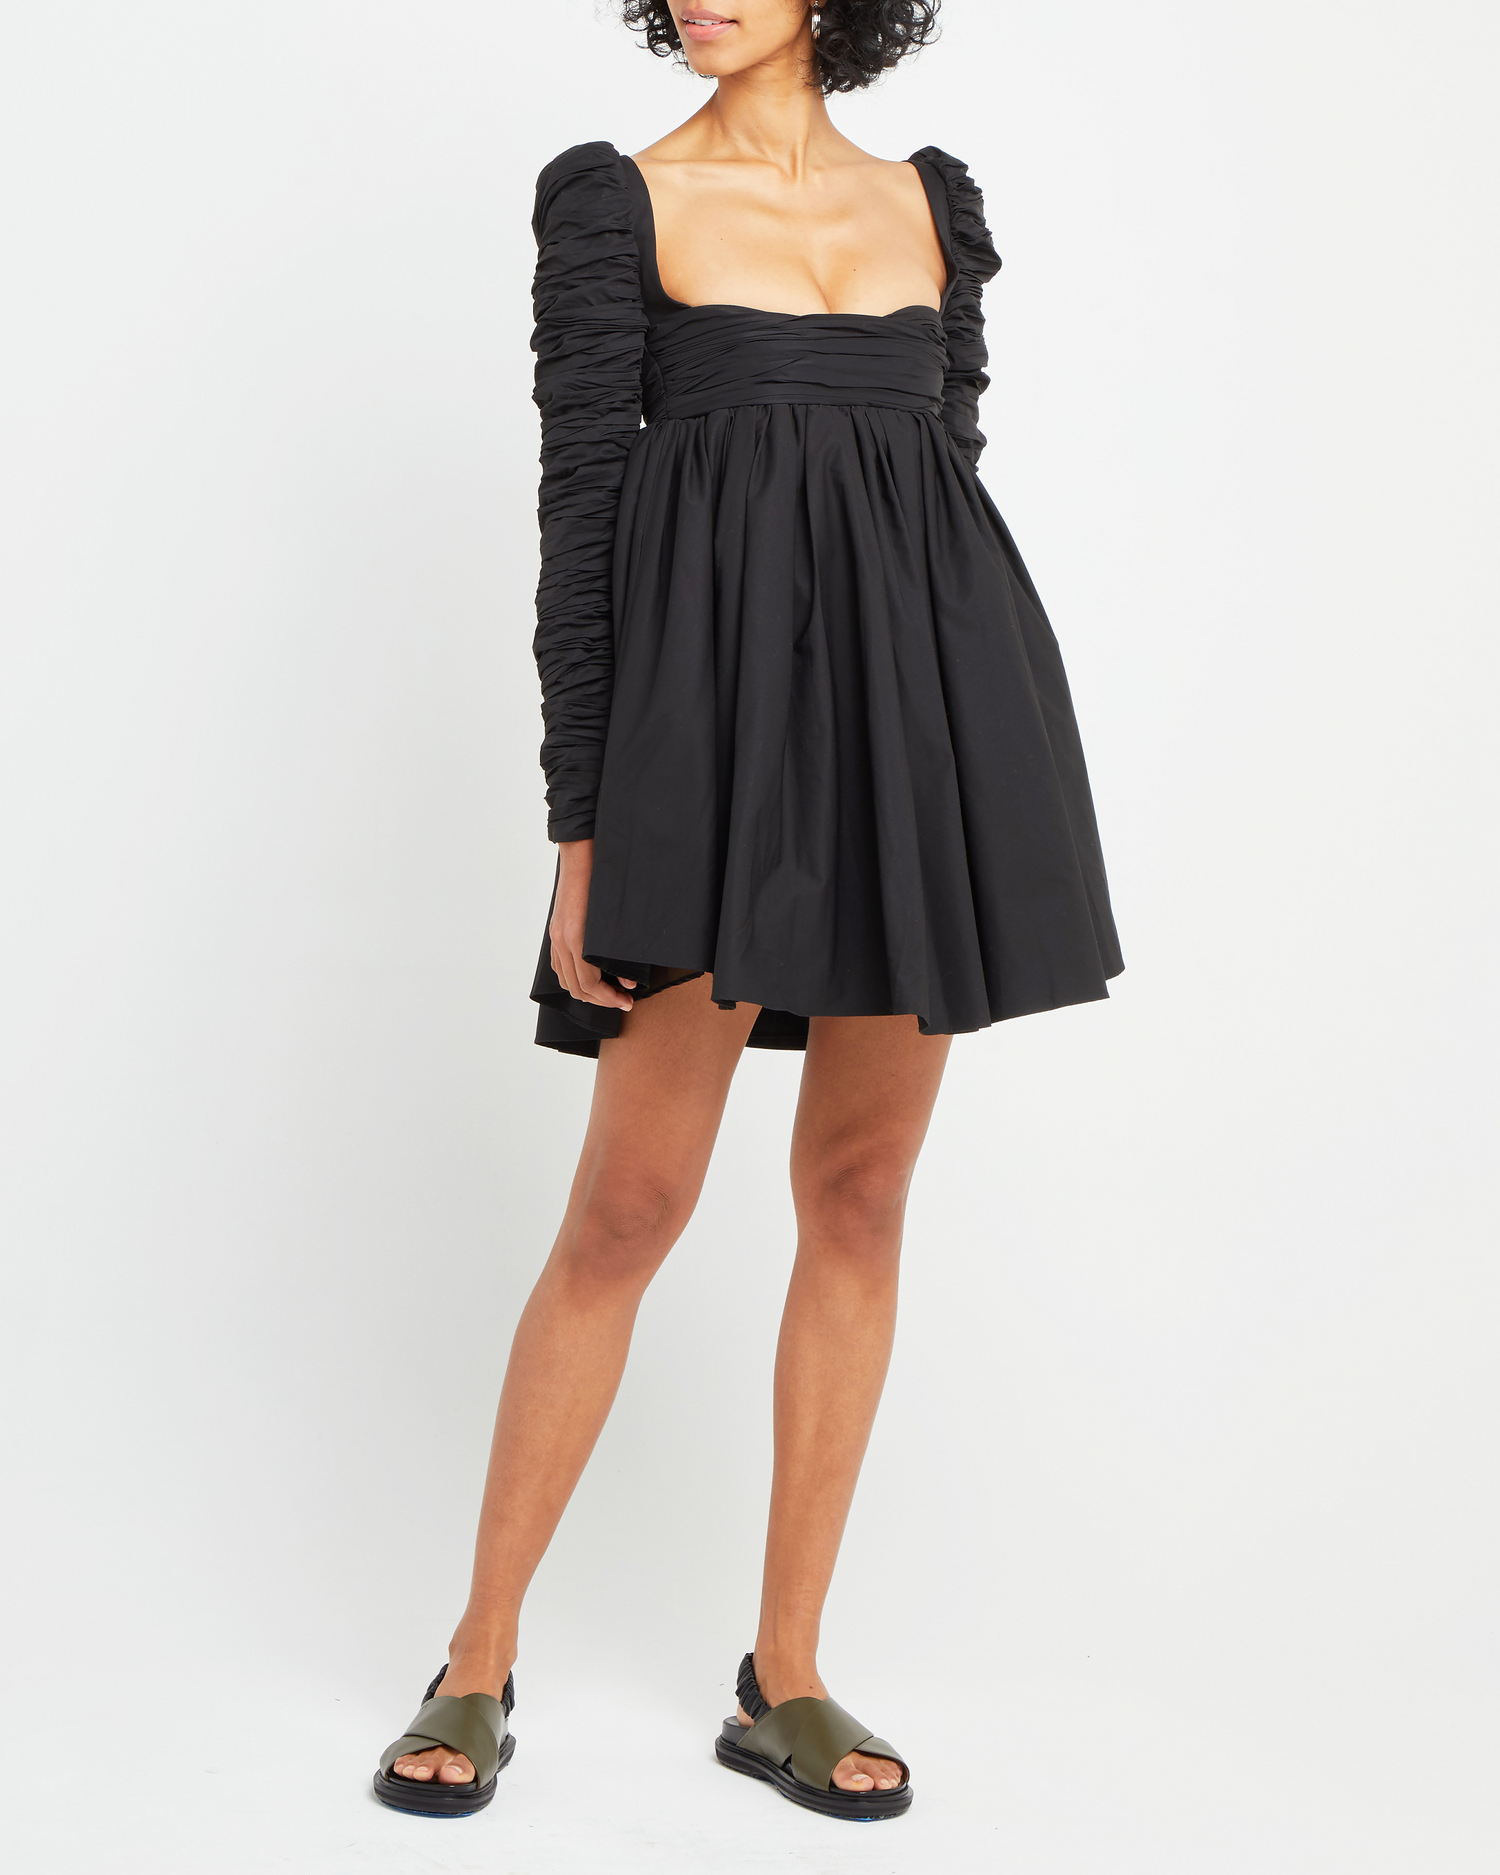 Fourth image of Structured Long-Sleeve Frock, a black mini dress, babydoll silhouette, long ruched sleeves, square neckline